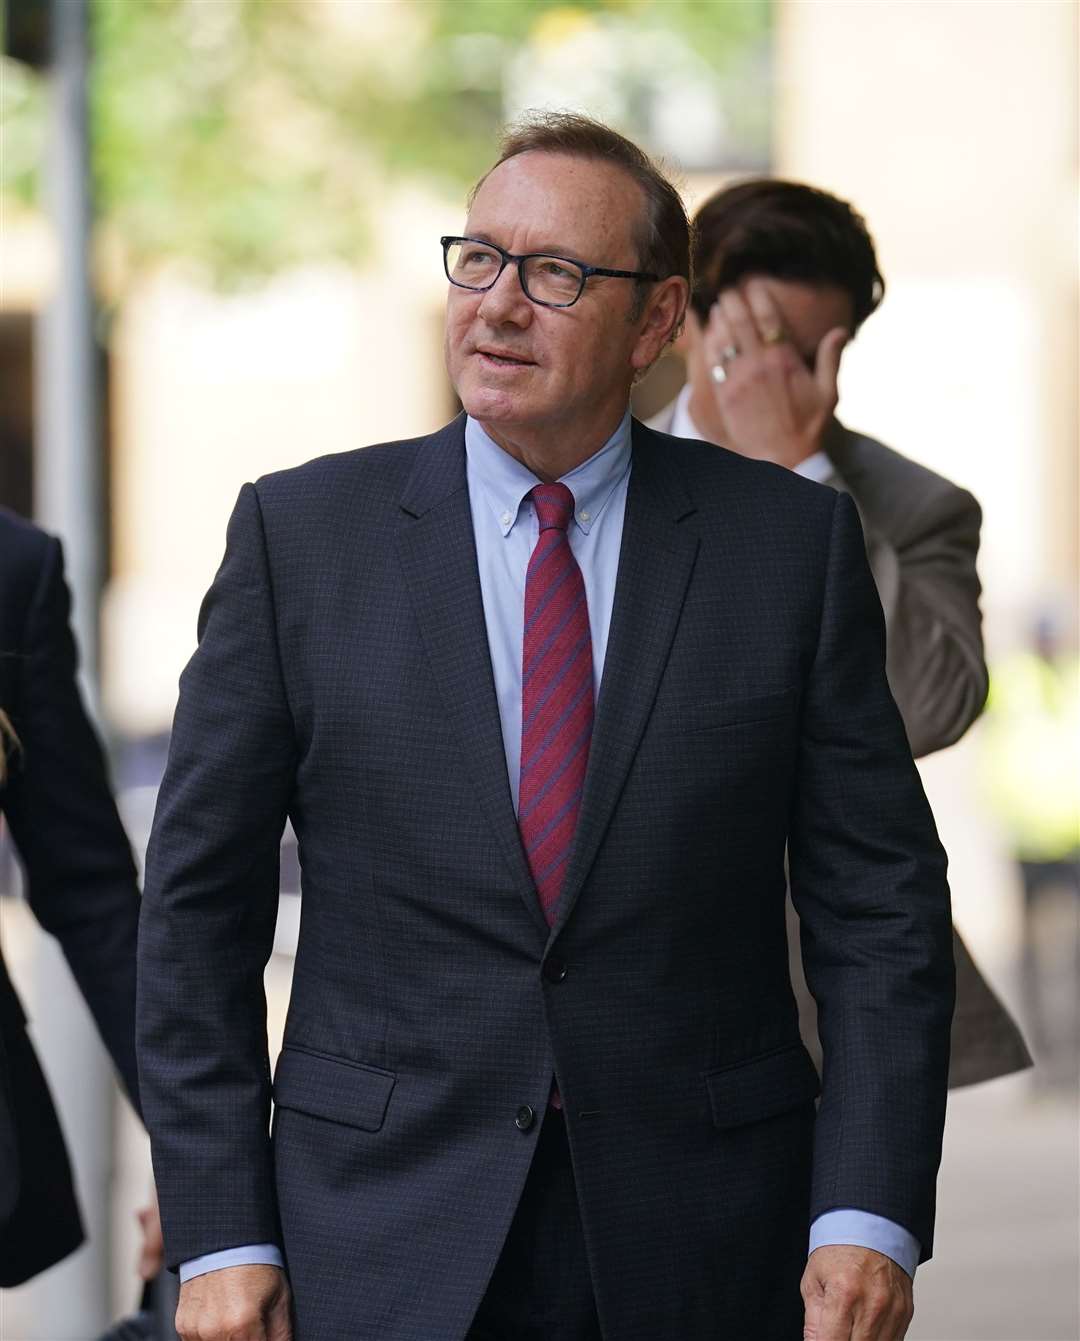 The alleged victim said he woke up to Kevin Spacey performing a sex act on him (Lucy North/PA)